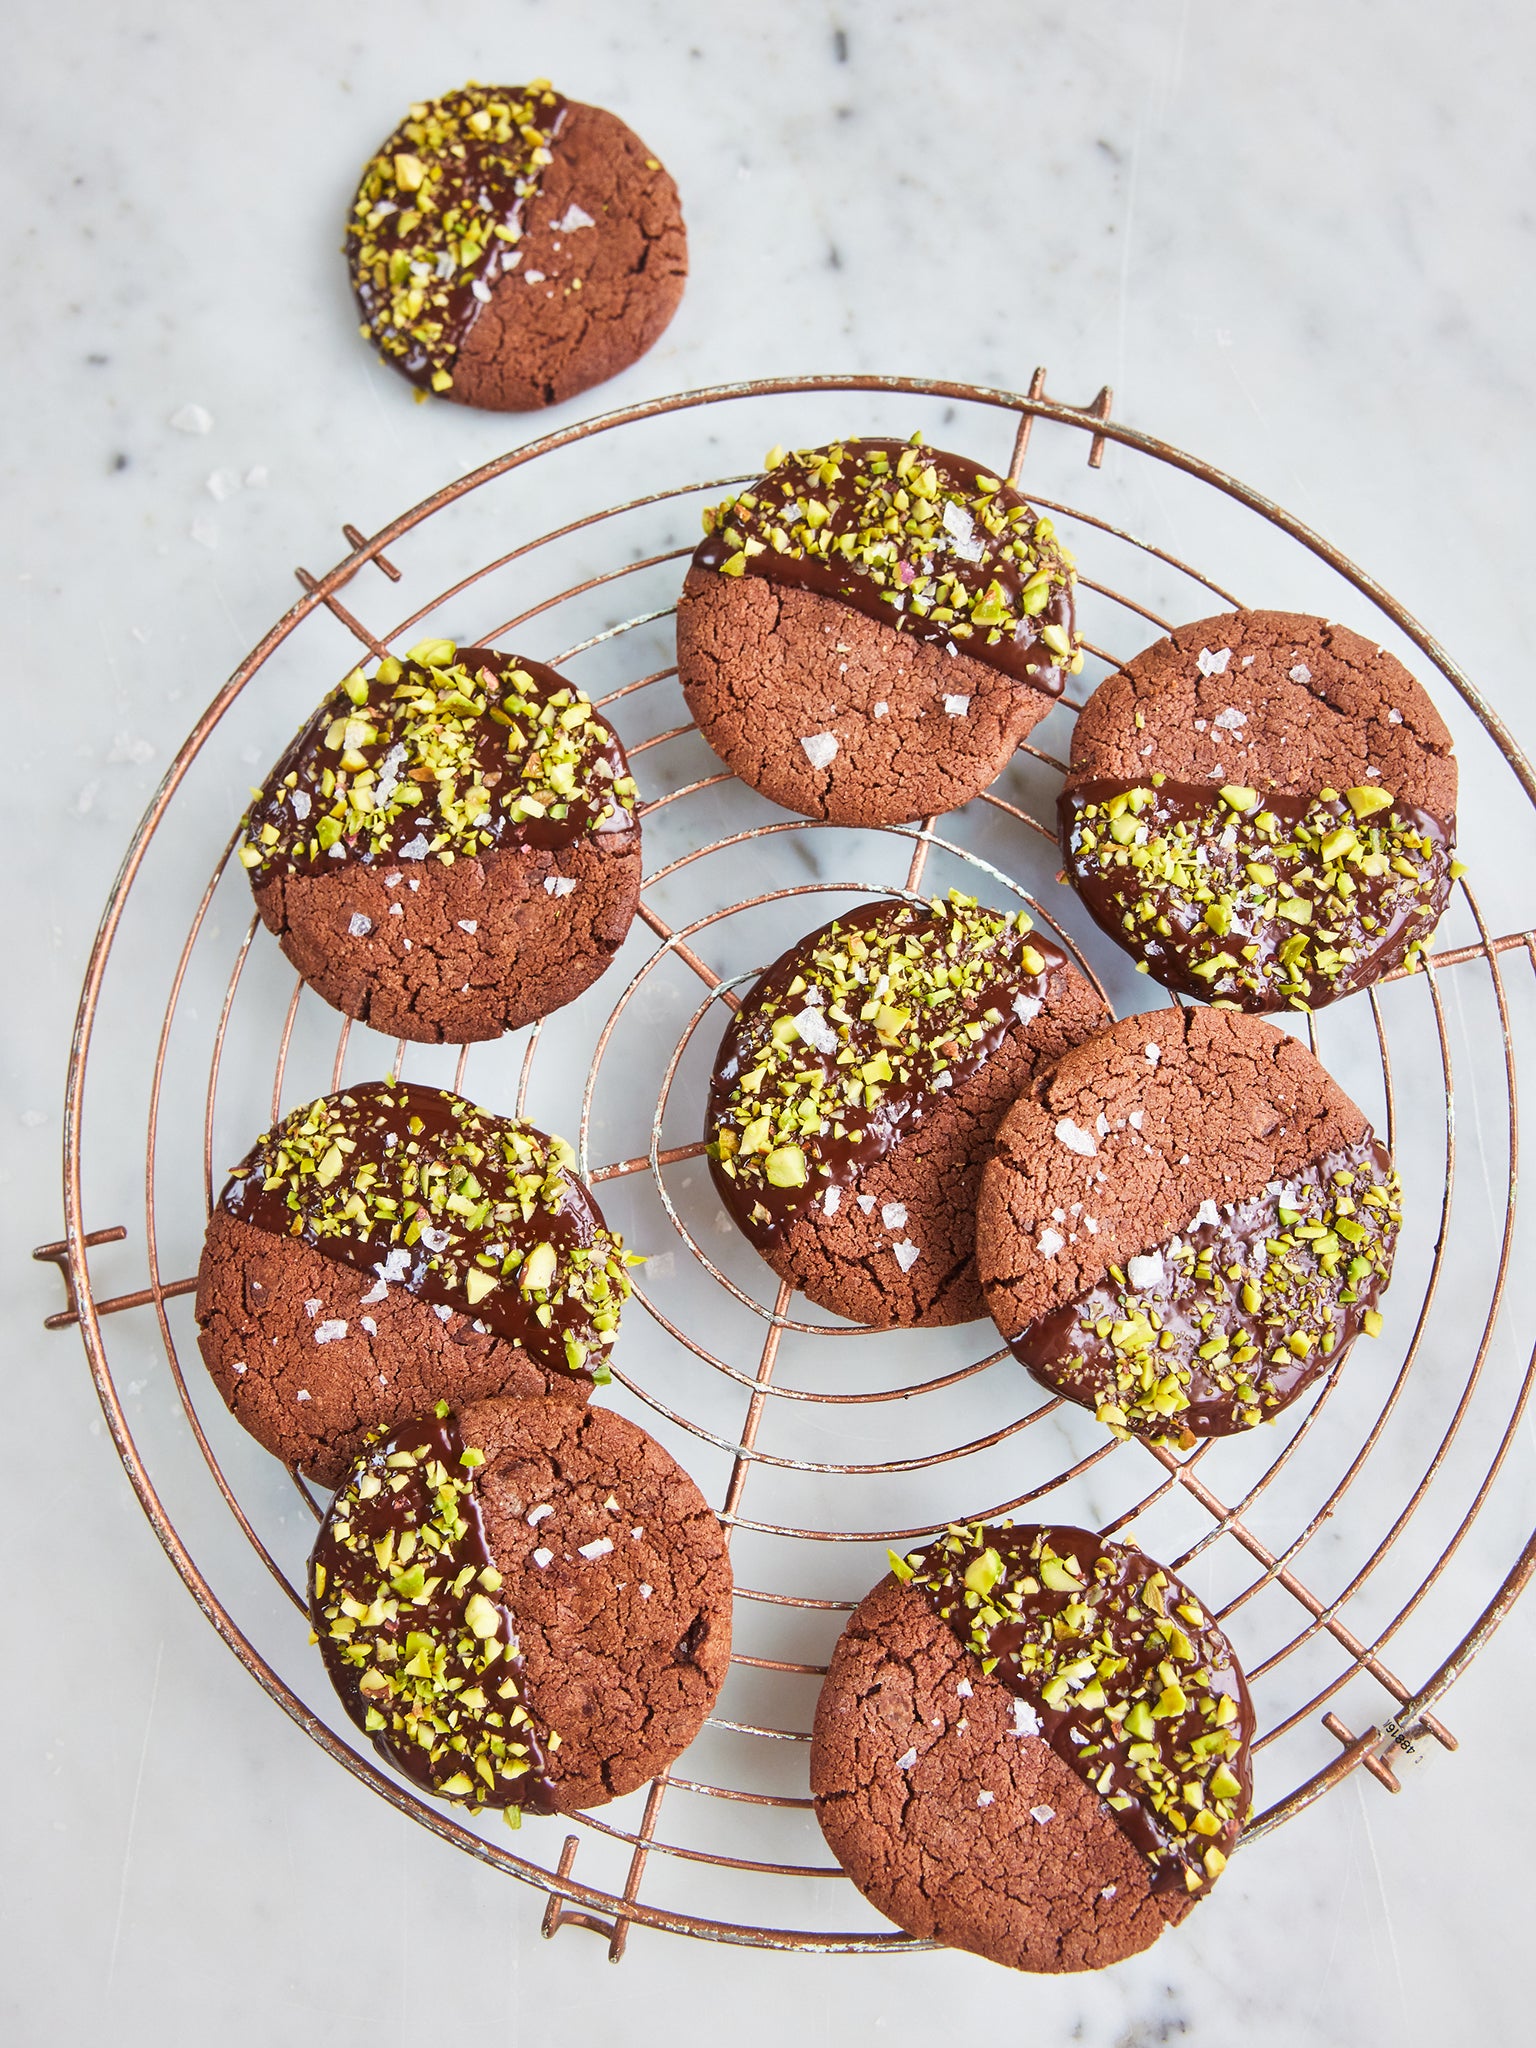 Pistachio and dark chocolate are a match made in heaven